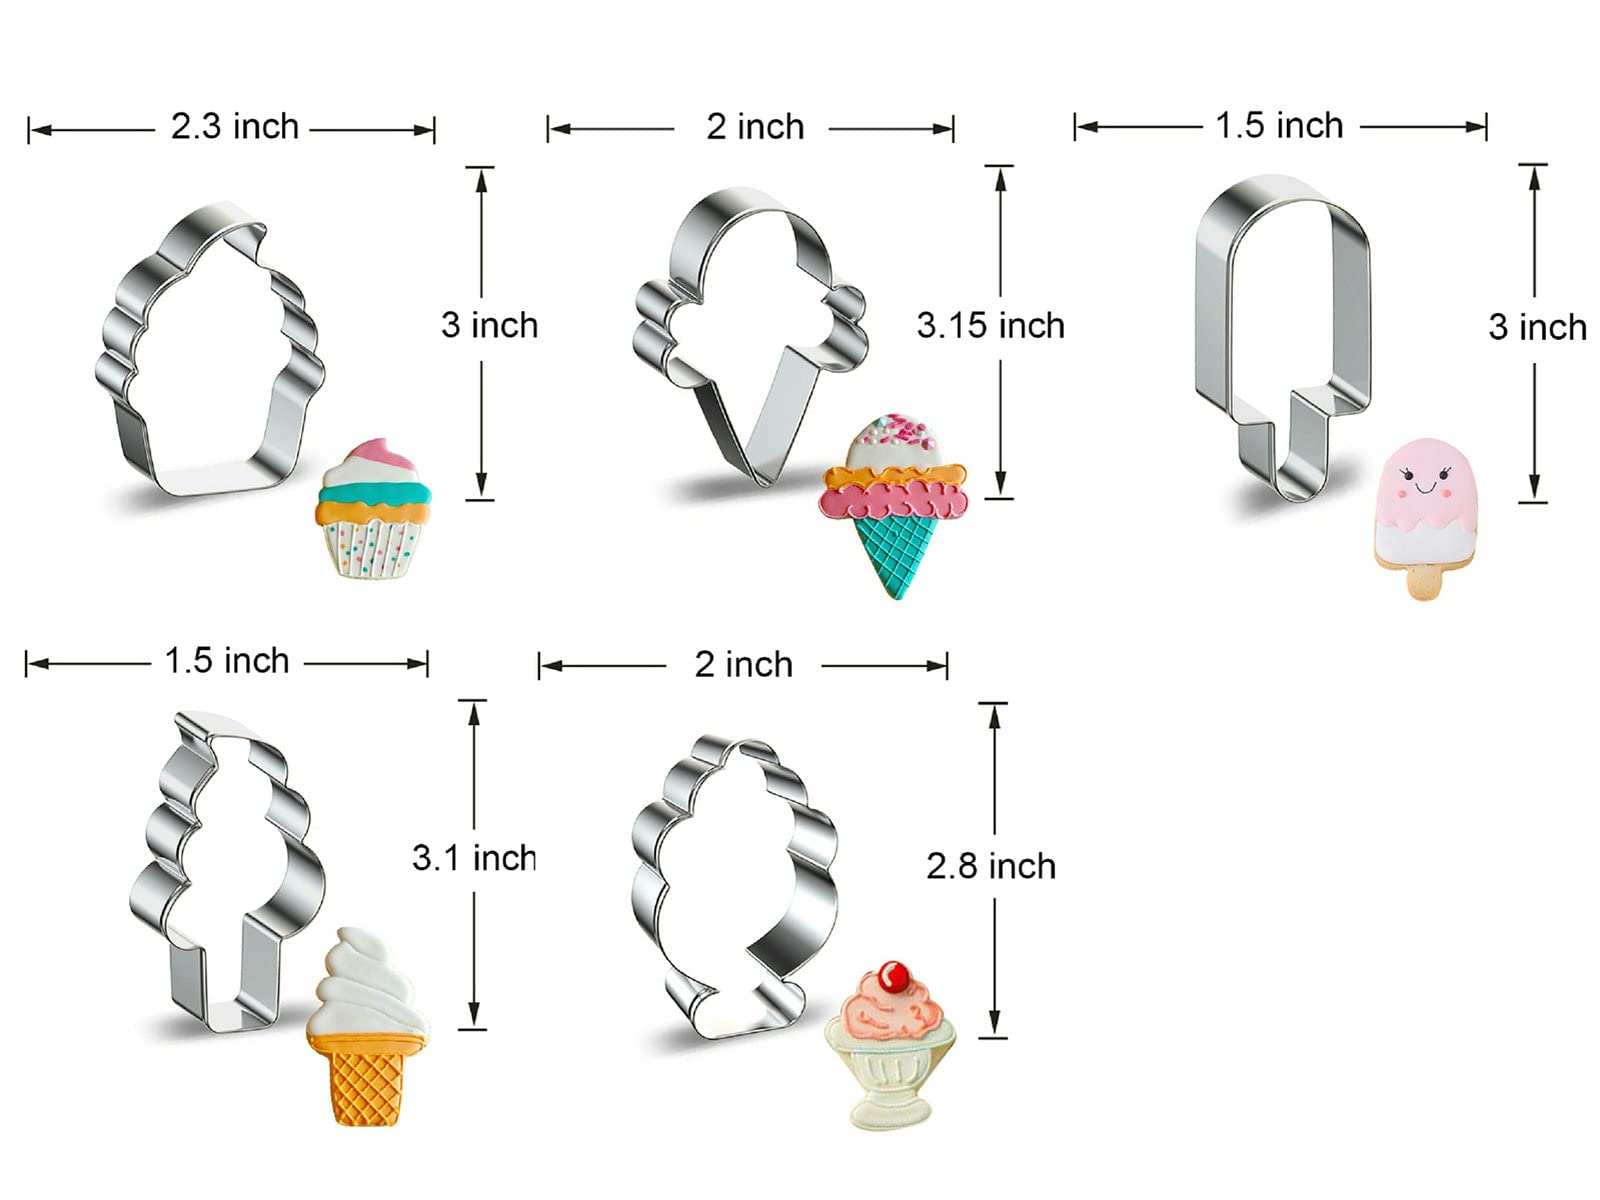 Summer Ice Cream Cookie Cutter Set 5-Piece Stainless Steel Metal Cookie Cutters Shapes Biscuit Molds with Ice Cream Cone, Soft Serve Cone, Popsicle, Ice Cream Sundae, Cupcake